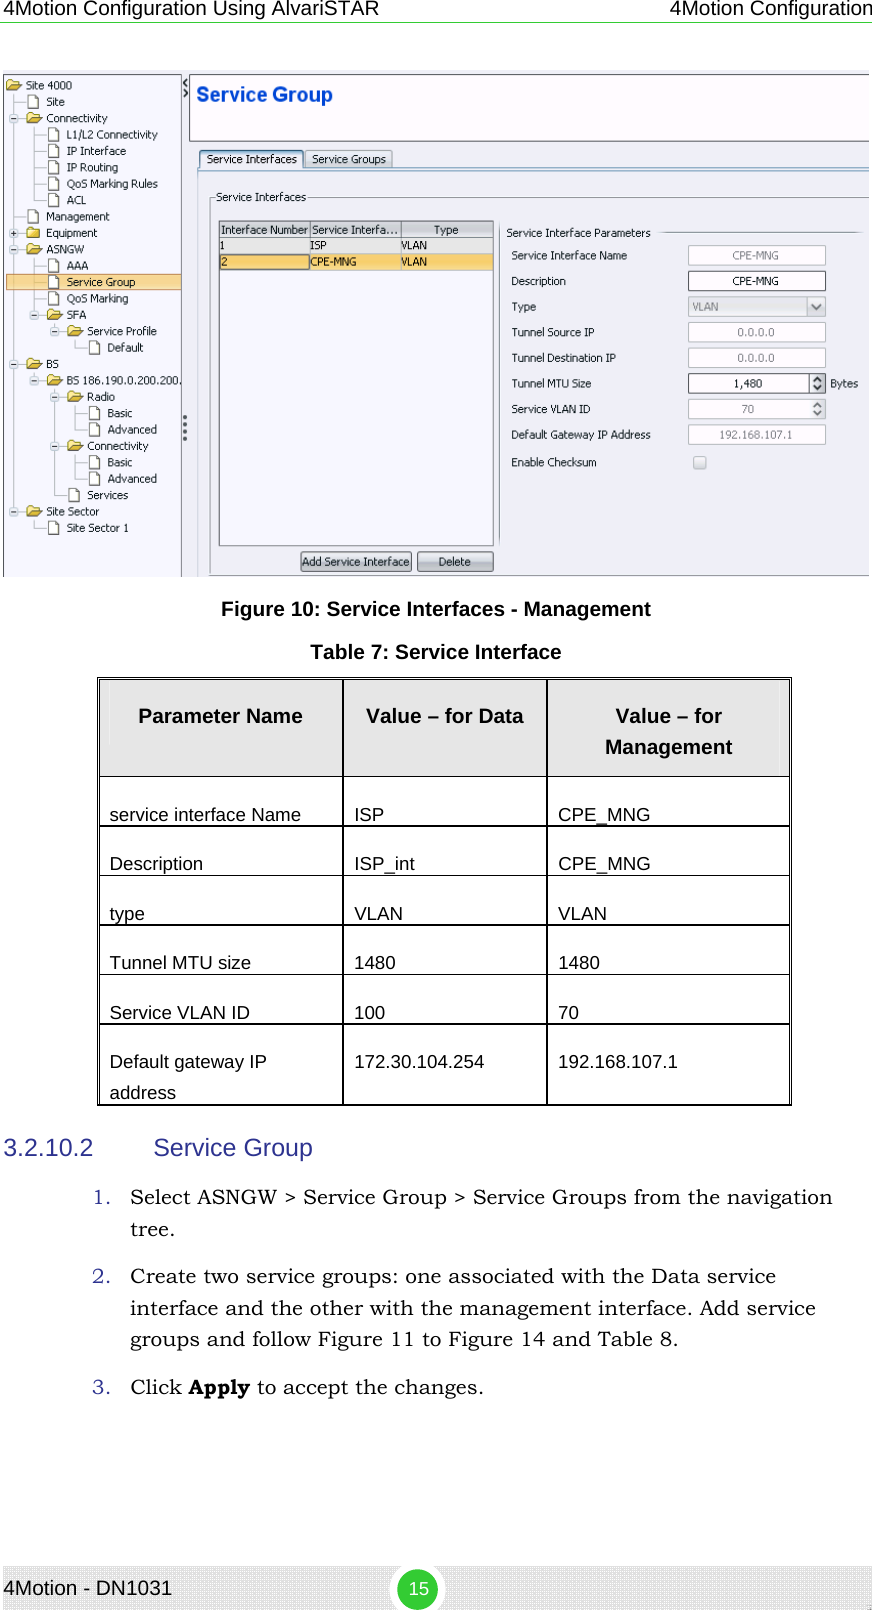 4Motion - DN1031  15 4Motion Configuration Using AlvariSTAR 4Motion Configuration  Figure 10: Service Interfaces - Management Table 7: Service Interface Parameter Name  Value – for Data  Value – for Management service interface Name  ISP  CPE_MNG Description   ISP_int  CPE_MNG type VLAN VLAN Tunnel MTU size  1480  1480 Service VLAN ID  100  70 Default gateway IP address 172.30.104.254 192.168.107.1 3.2.10.2  Service Group 1. Select ASNGW &gt; Service Group &gt; Service Groups from the navigation tree. 2. Create two service groups: one associated with the Data service interface and the other with the management interface. Add service groups and follow Figure 11 to Figure 14 and Table 8. 3. Click Apply to accept the changes. 